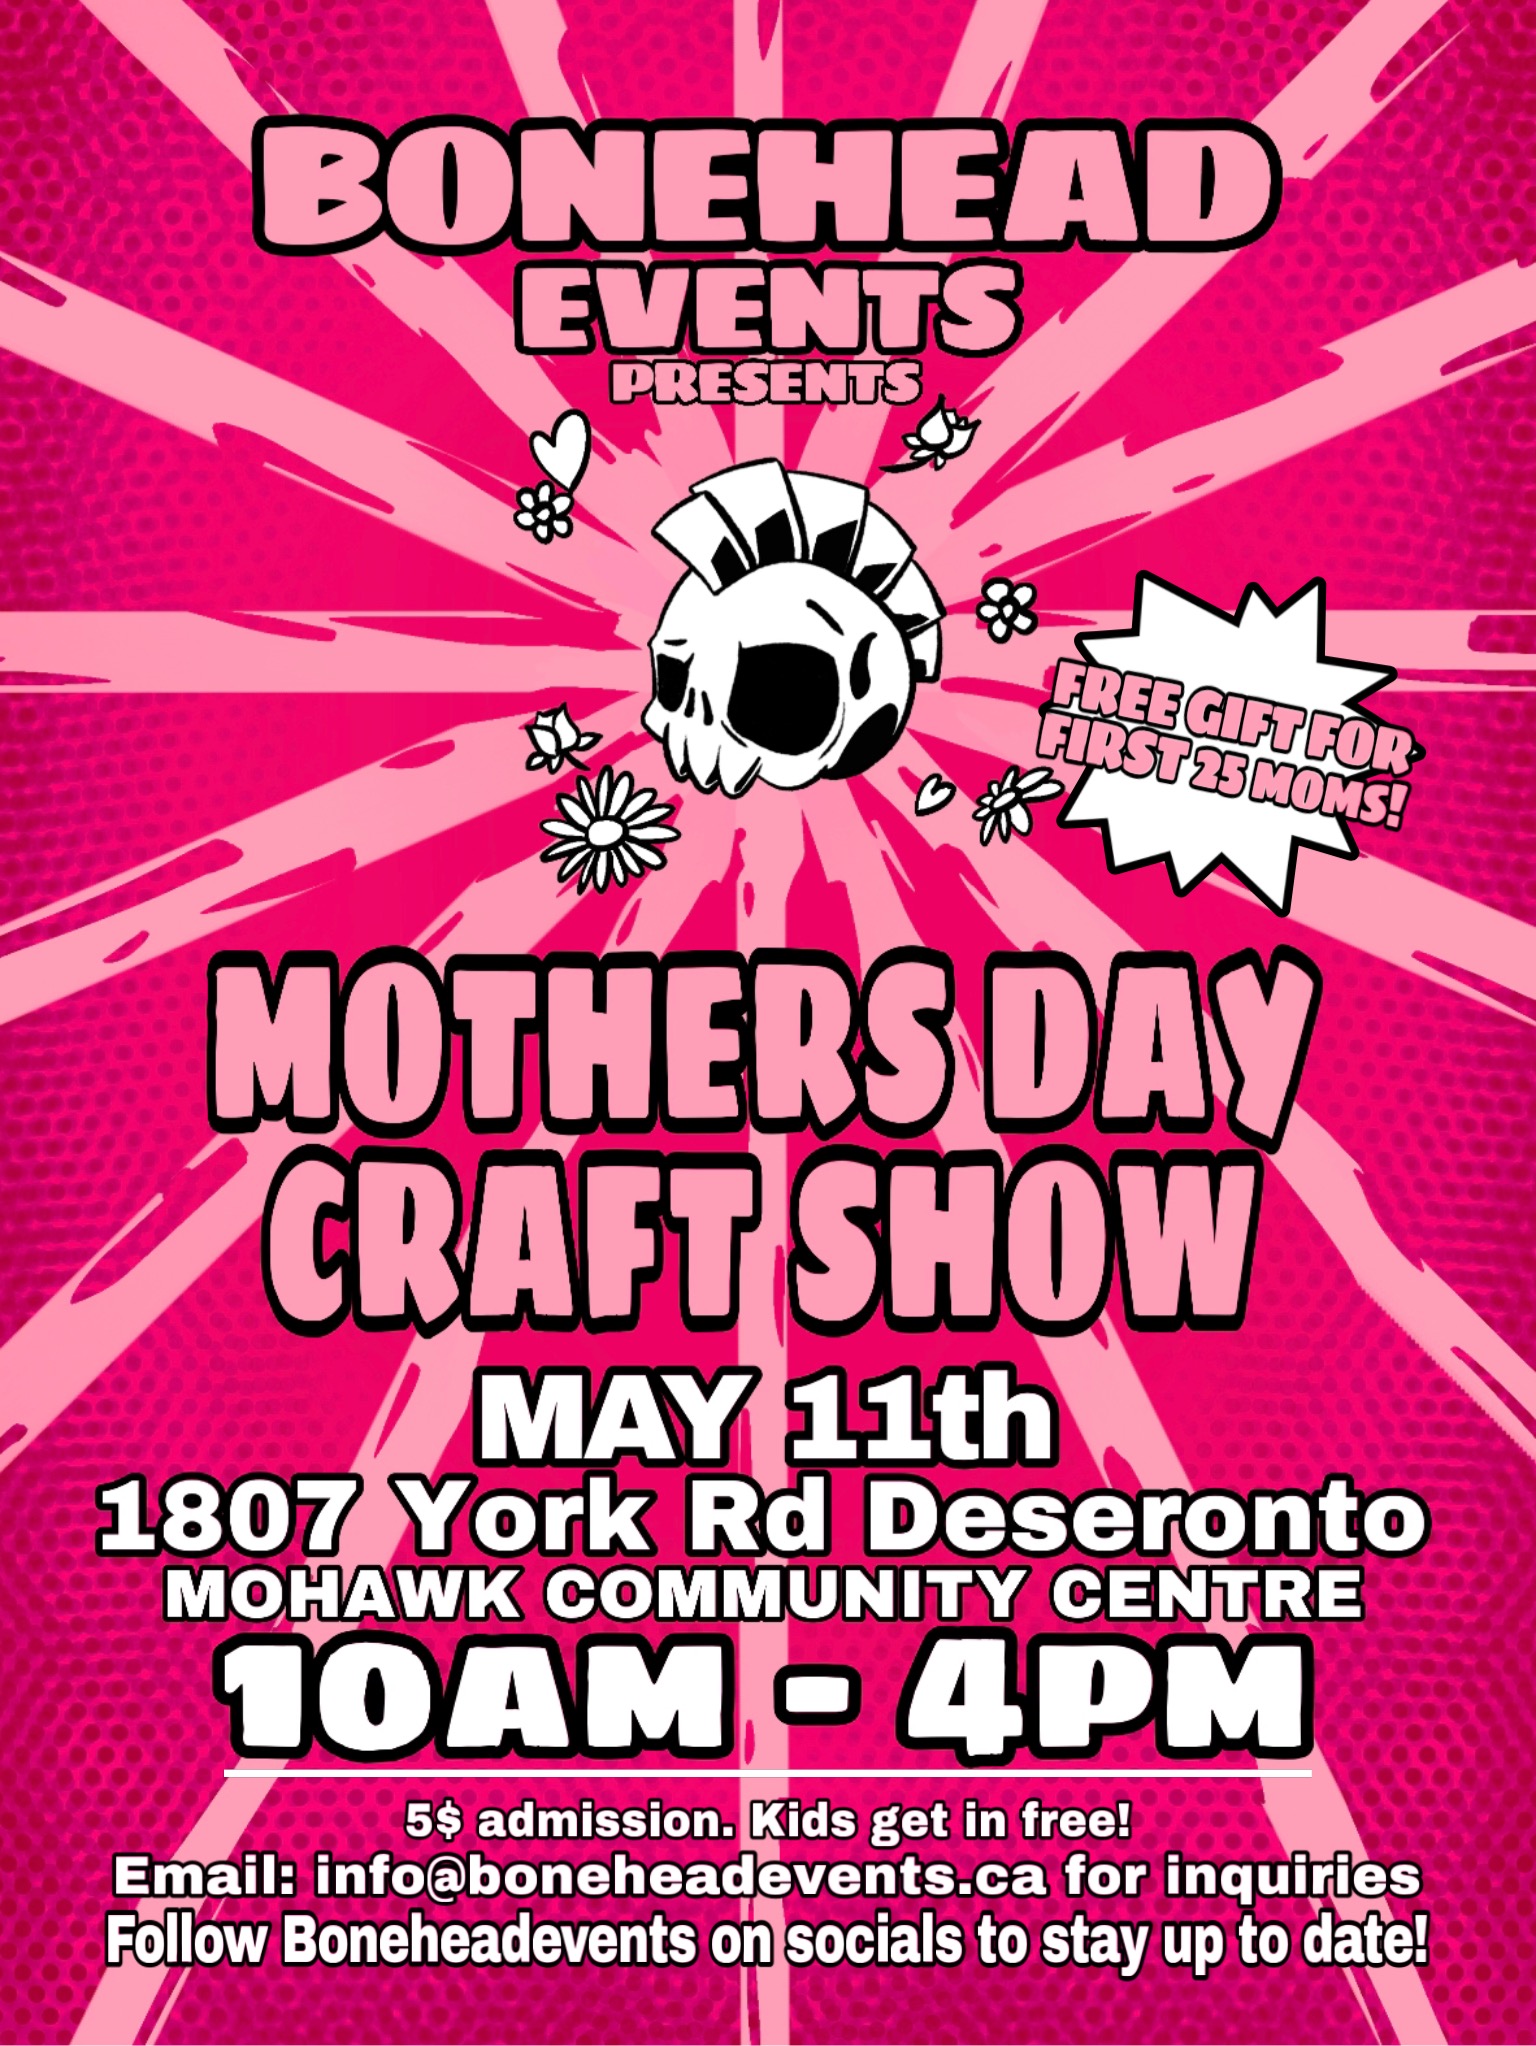 Poster titled "Mothers Day Craft Show" with a pink background.